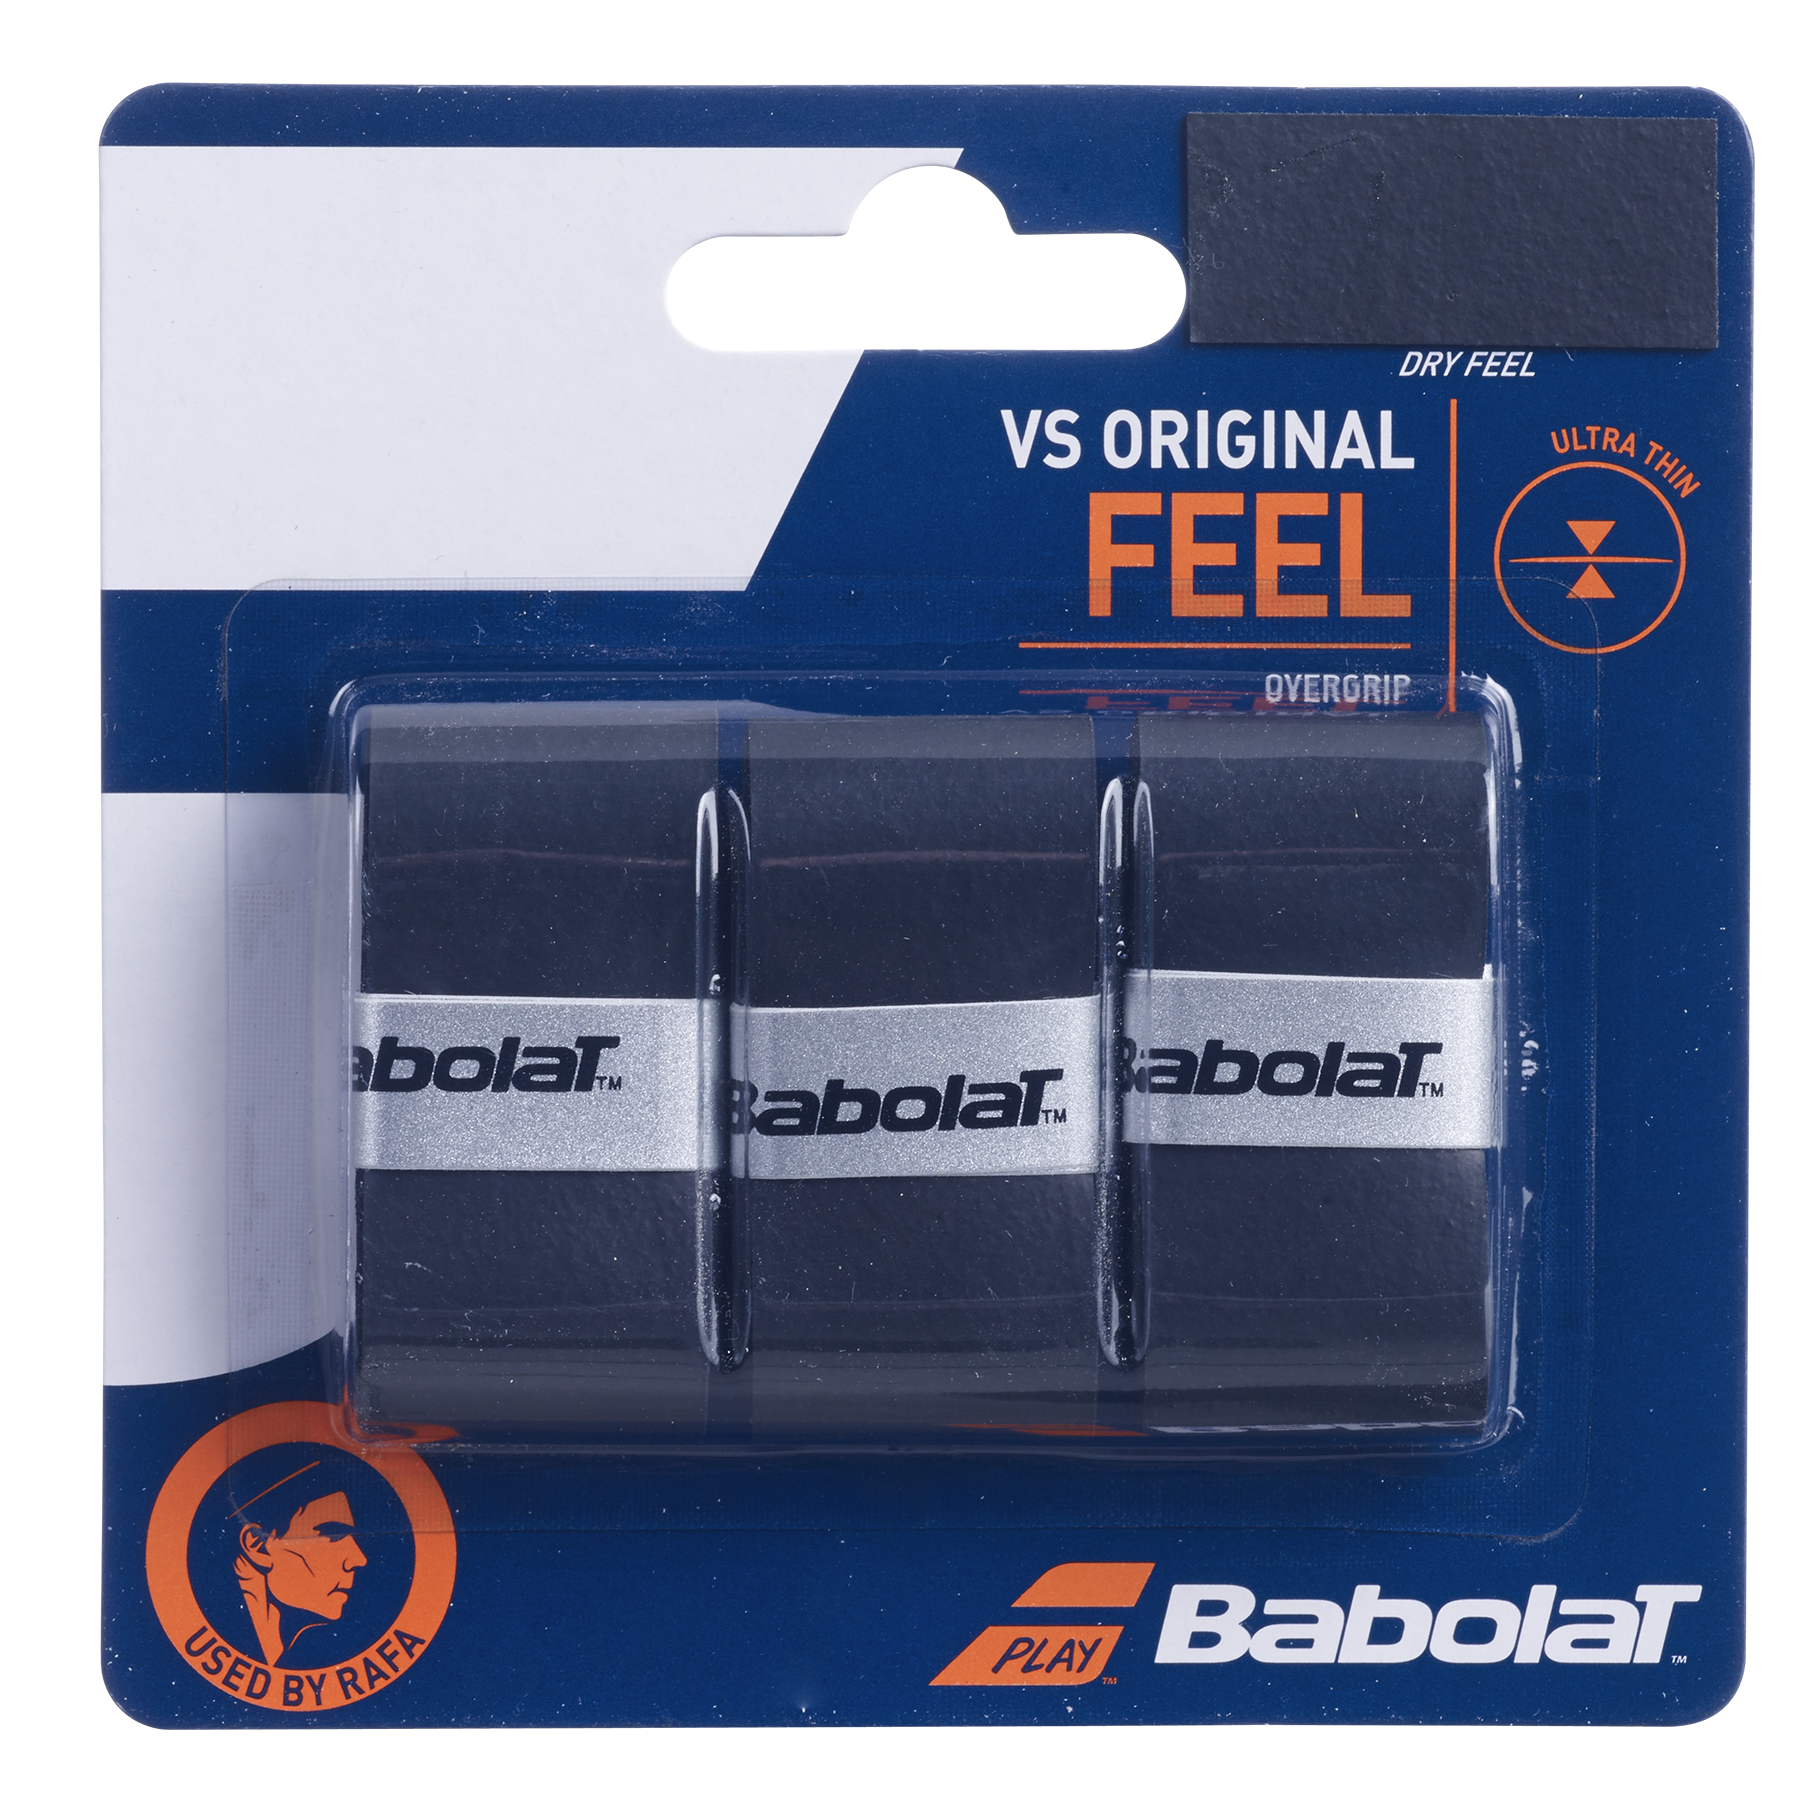 Great Price As Used At Wimbledon By Many Pros 10 Babolat My Grip Overgrips 